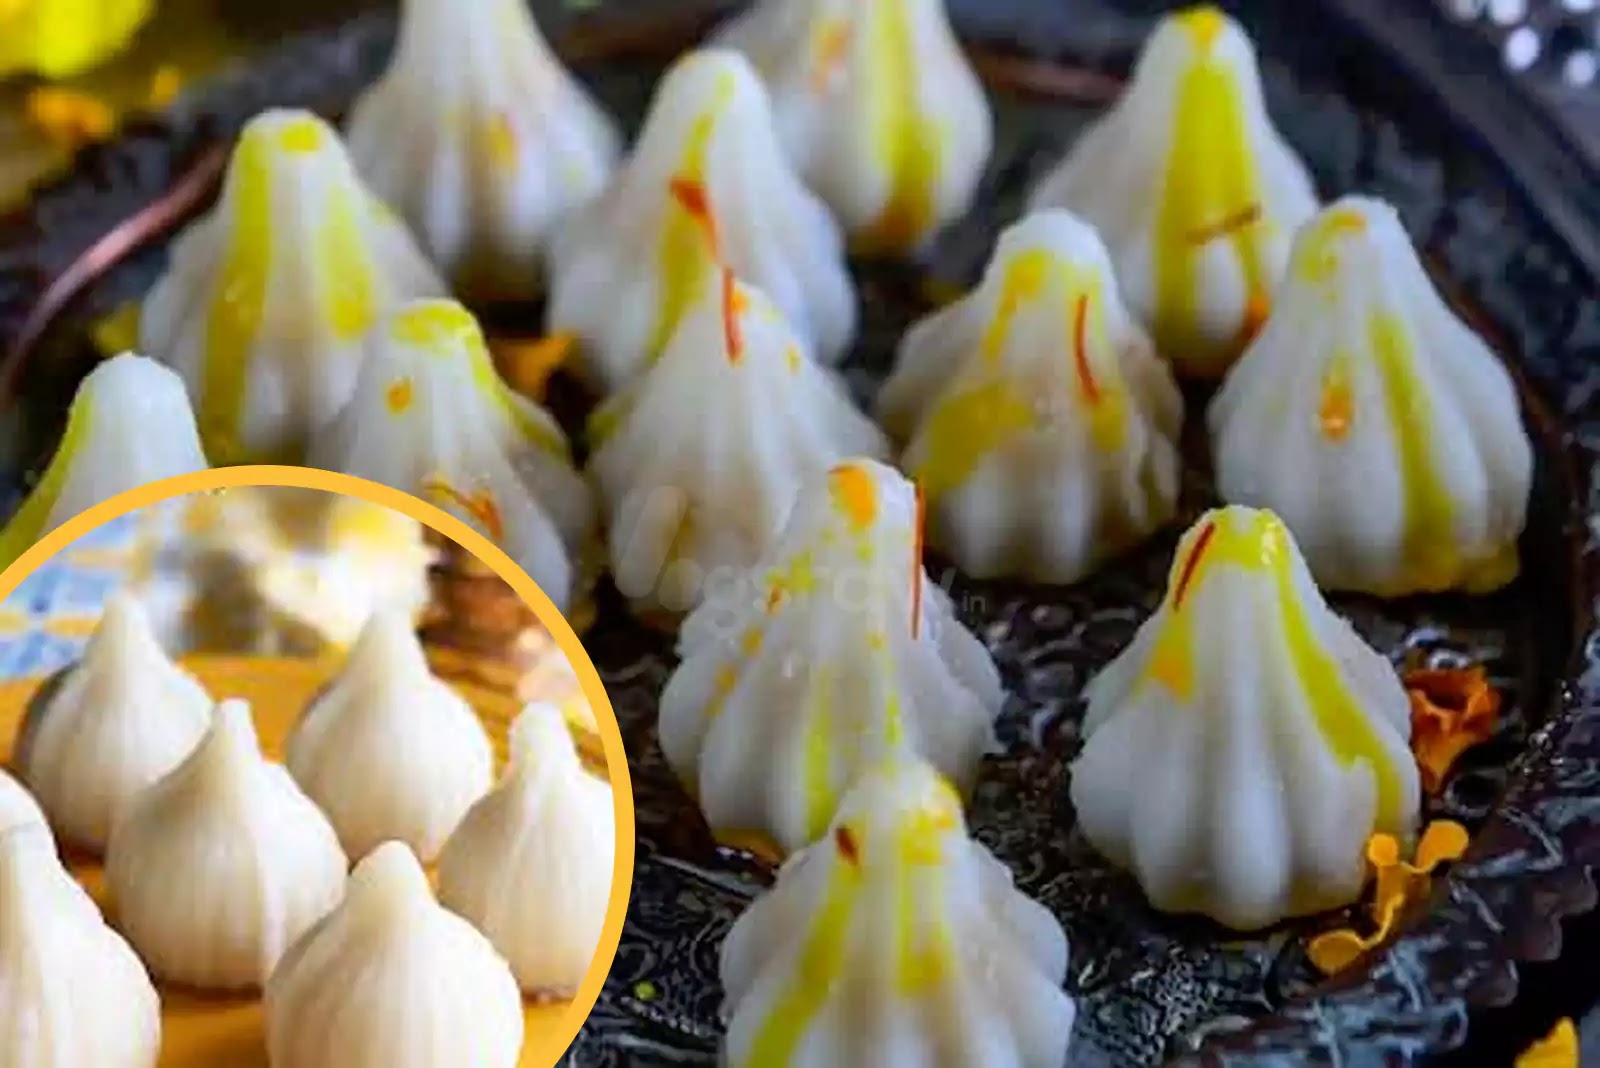 Easy to make Modak in 10 minutes, you will like it very much